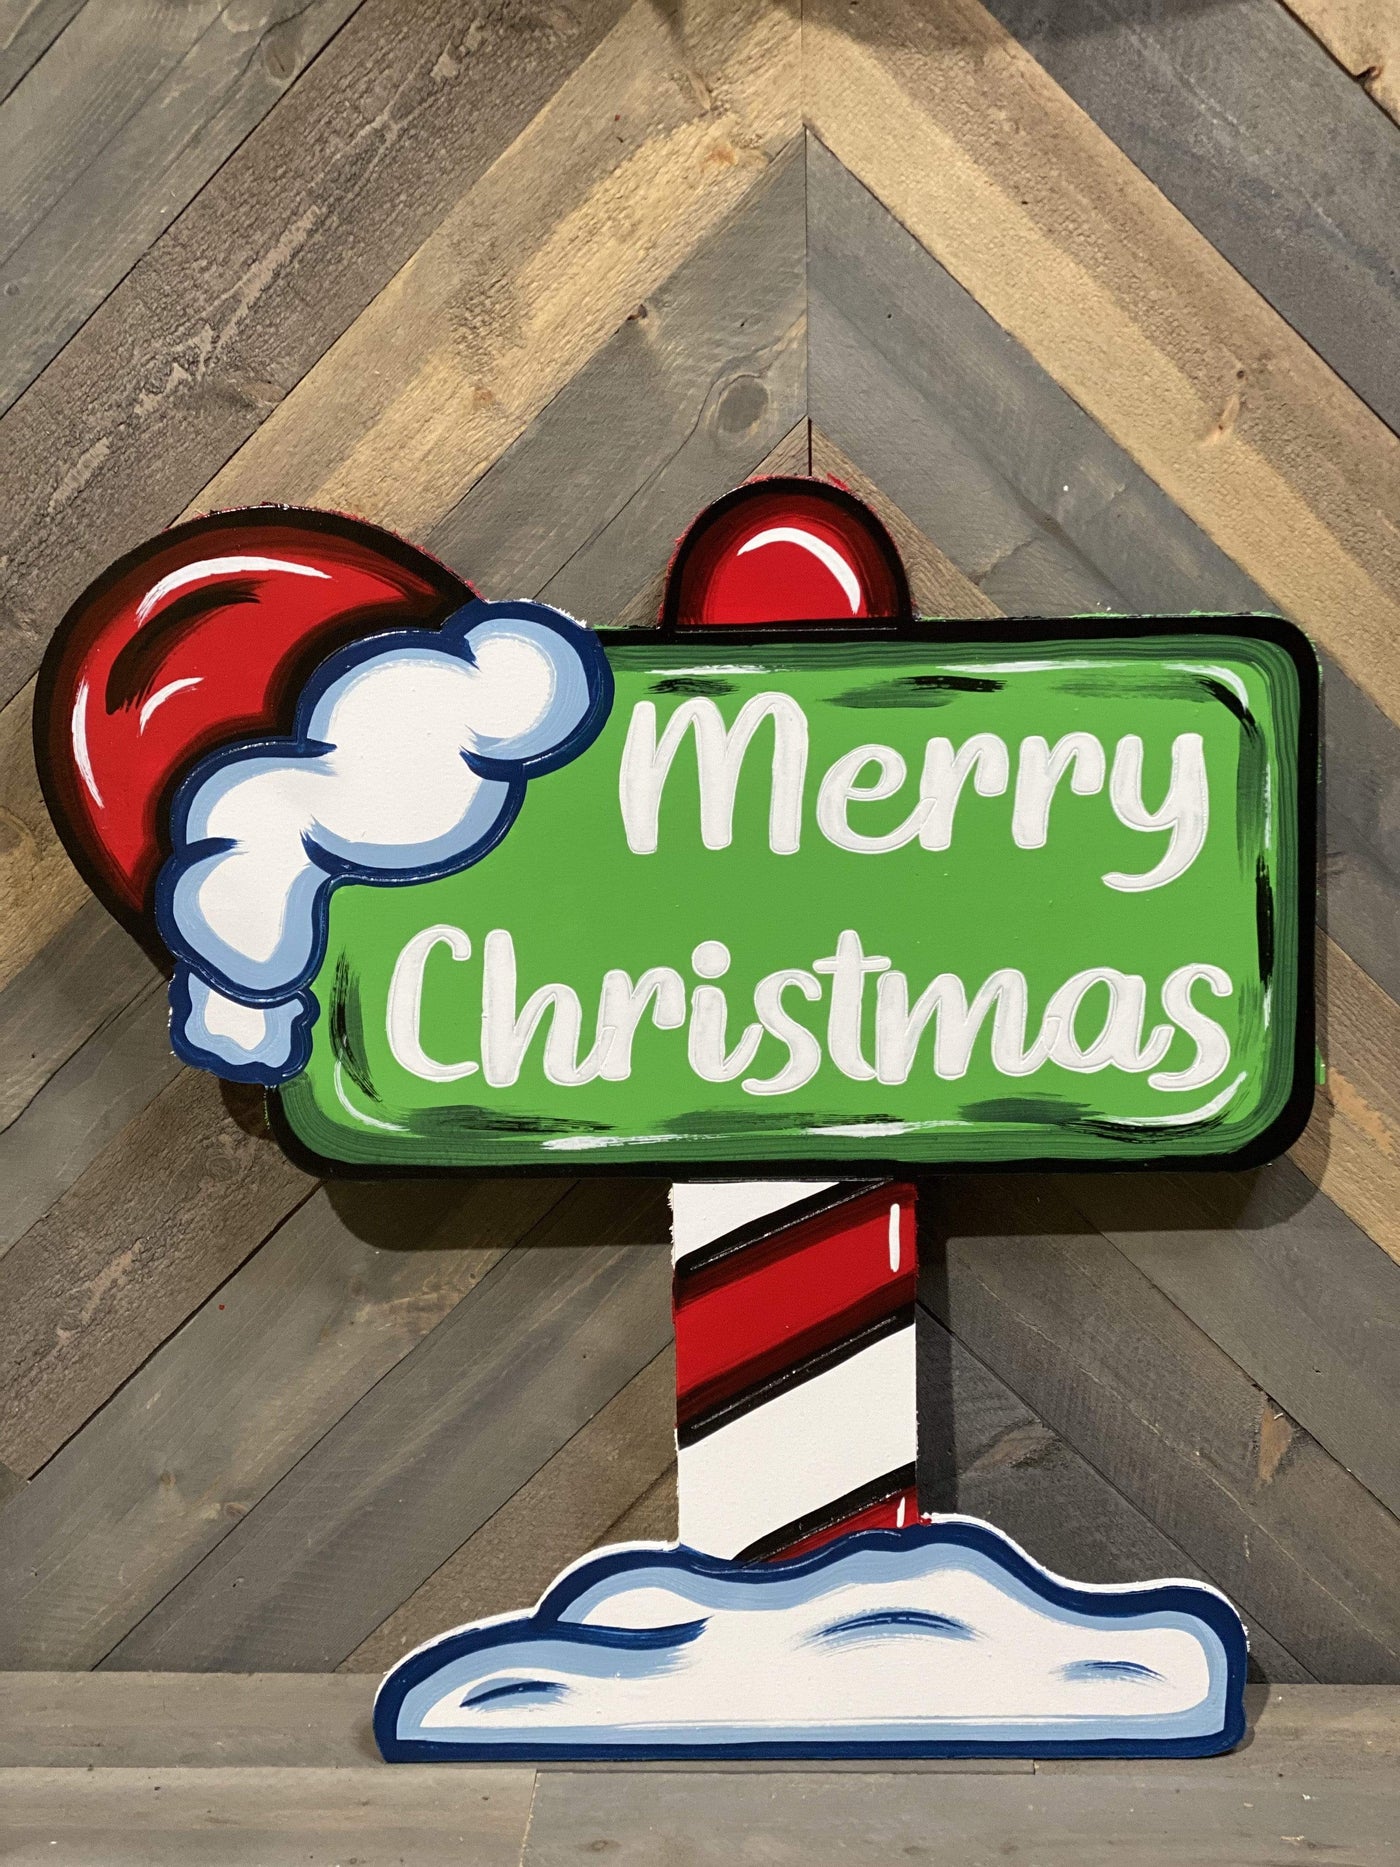 Merry Christmas Candy Cane Pole Sign painted yard art design